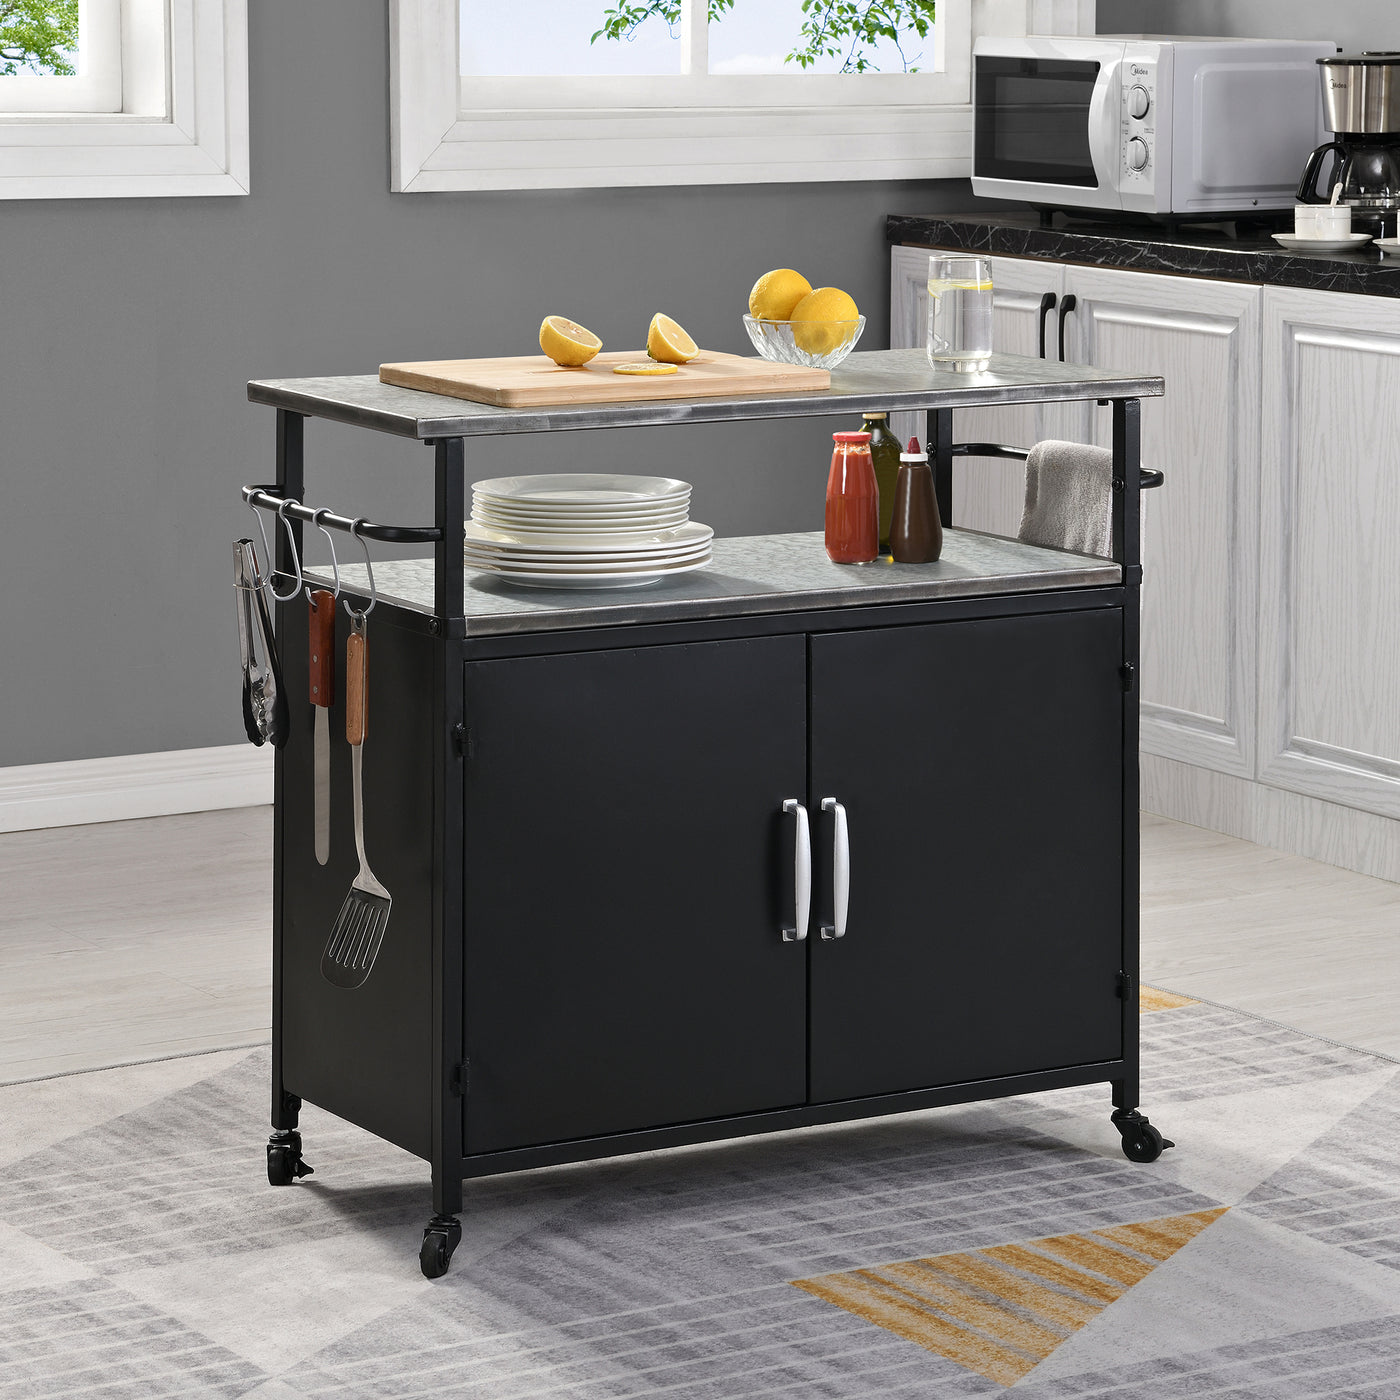 FirsTime & Co. Black Davidson Outdoor Grilling Kitchen Cart, Industrial Style, Made of Metal